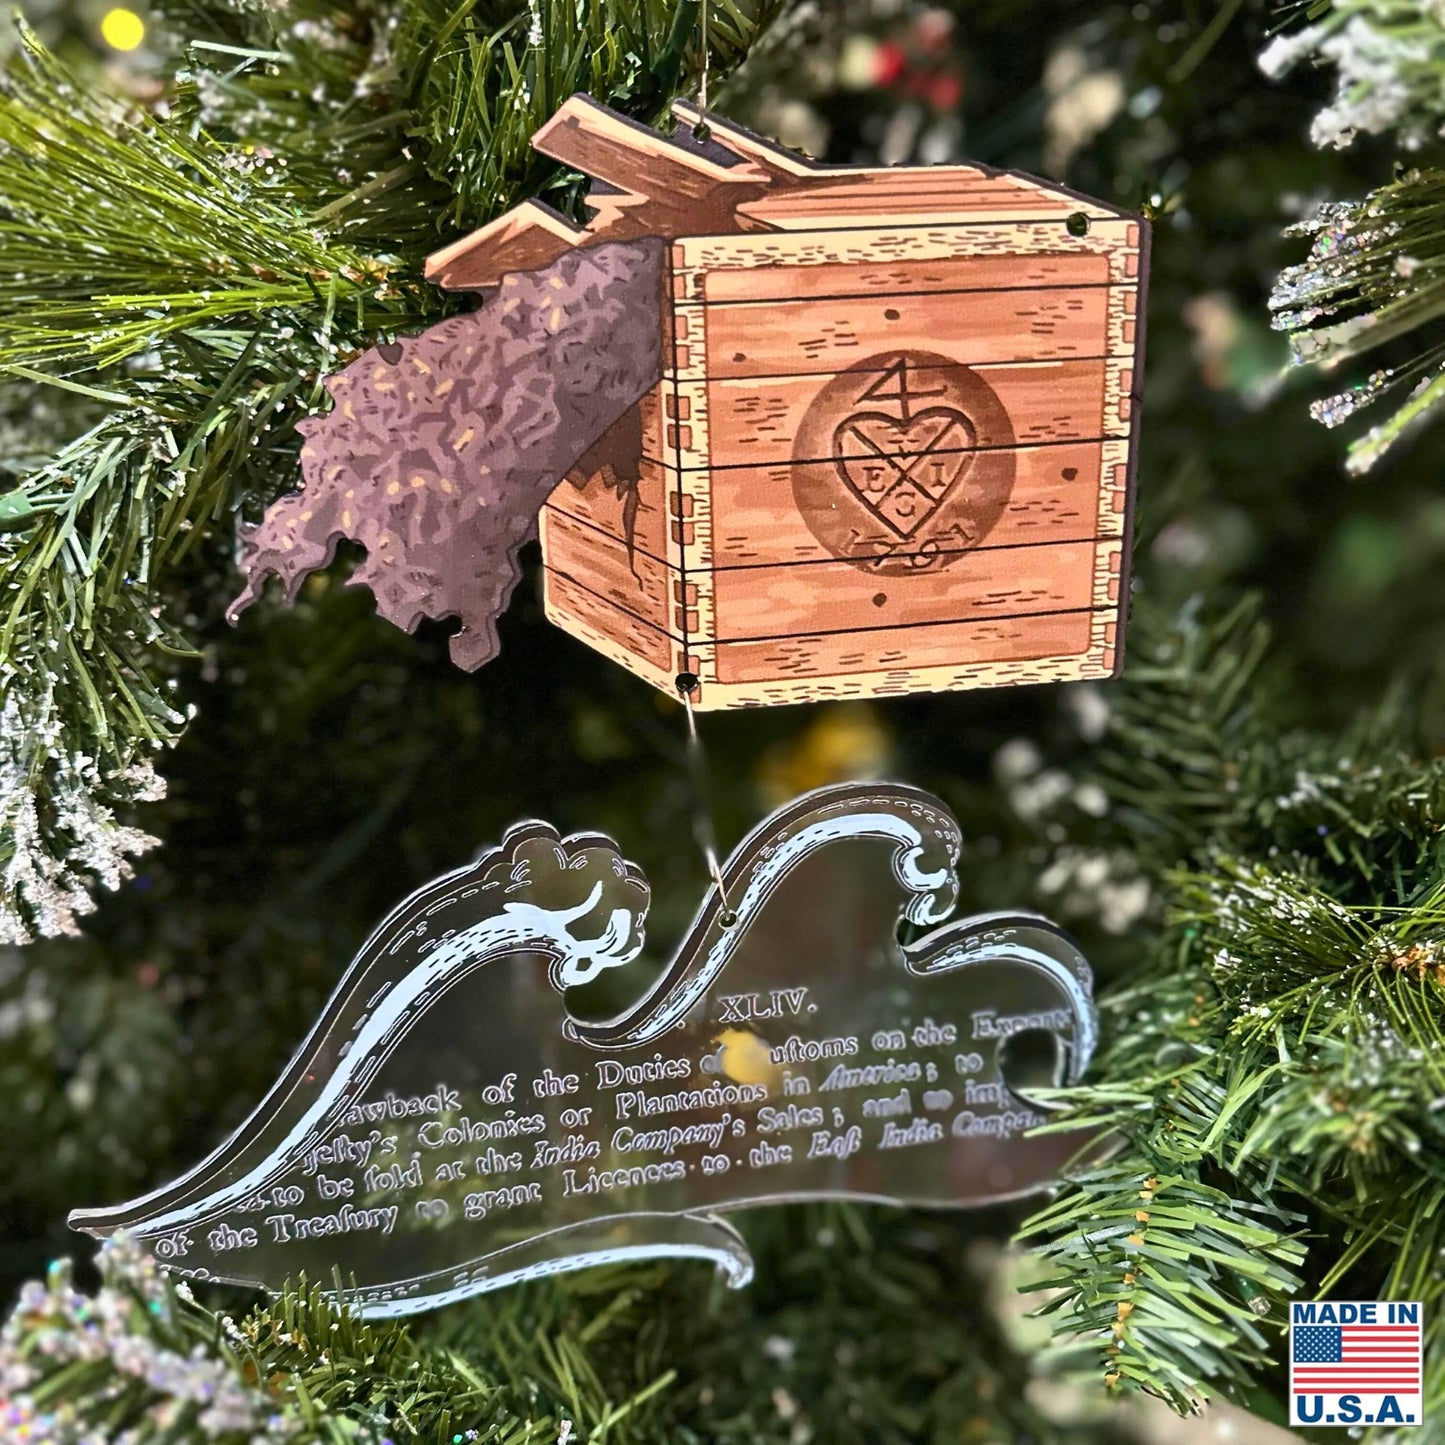 Crate and wave from Boston Tea Party 250th Anniversary Ornament — Made in America from The History List store